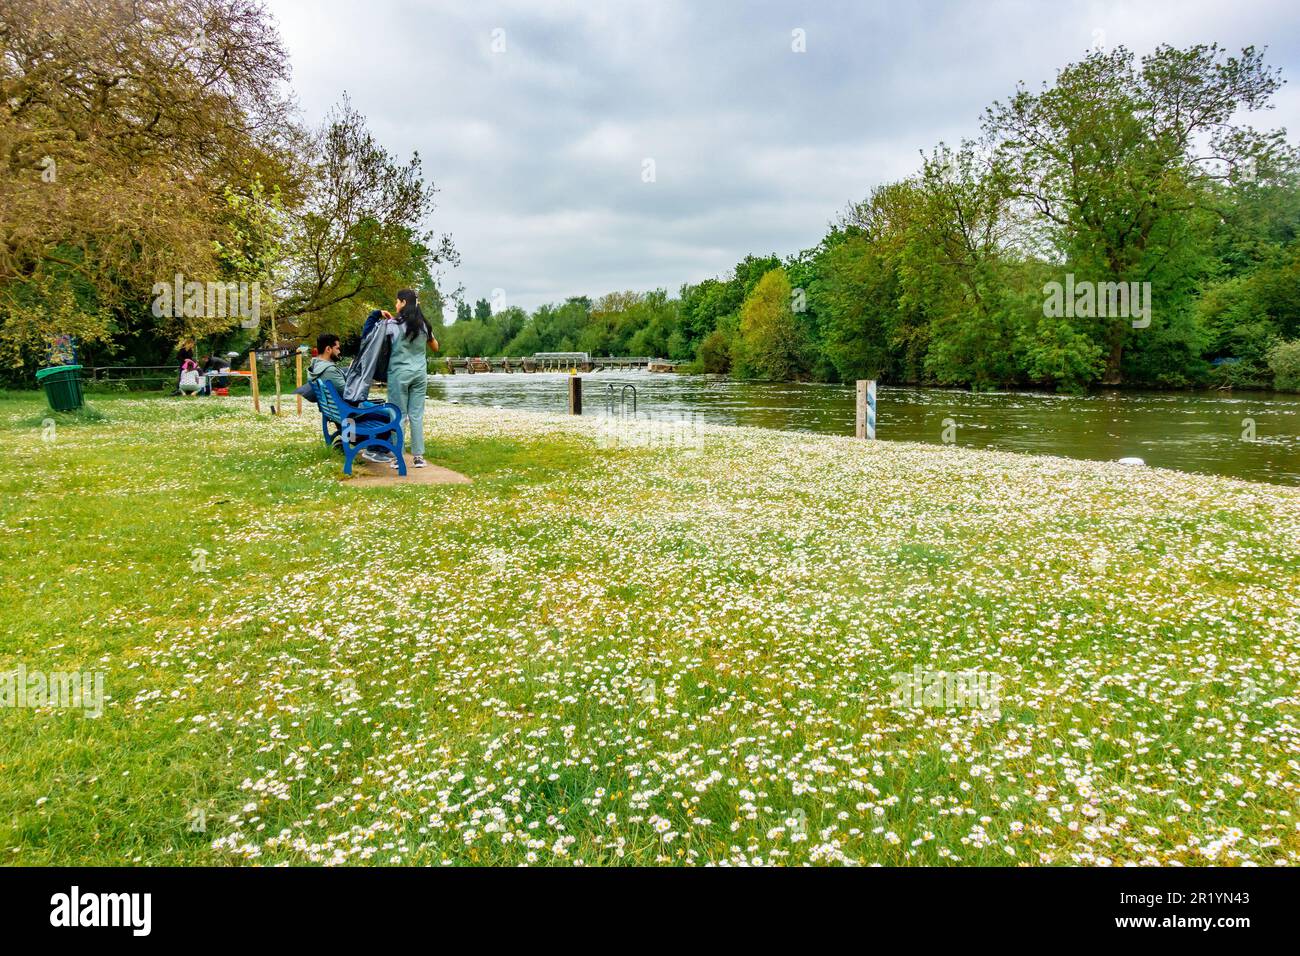 Daisies flowering in Kings Meadow park next to The River Thames at Reading in Berkshire, UK Stock Photo